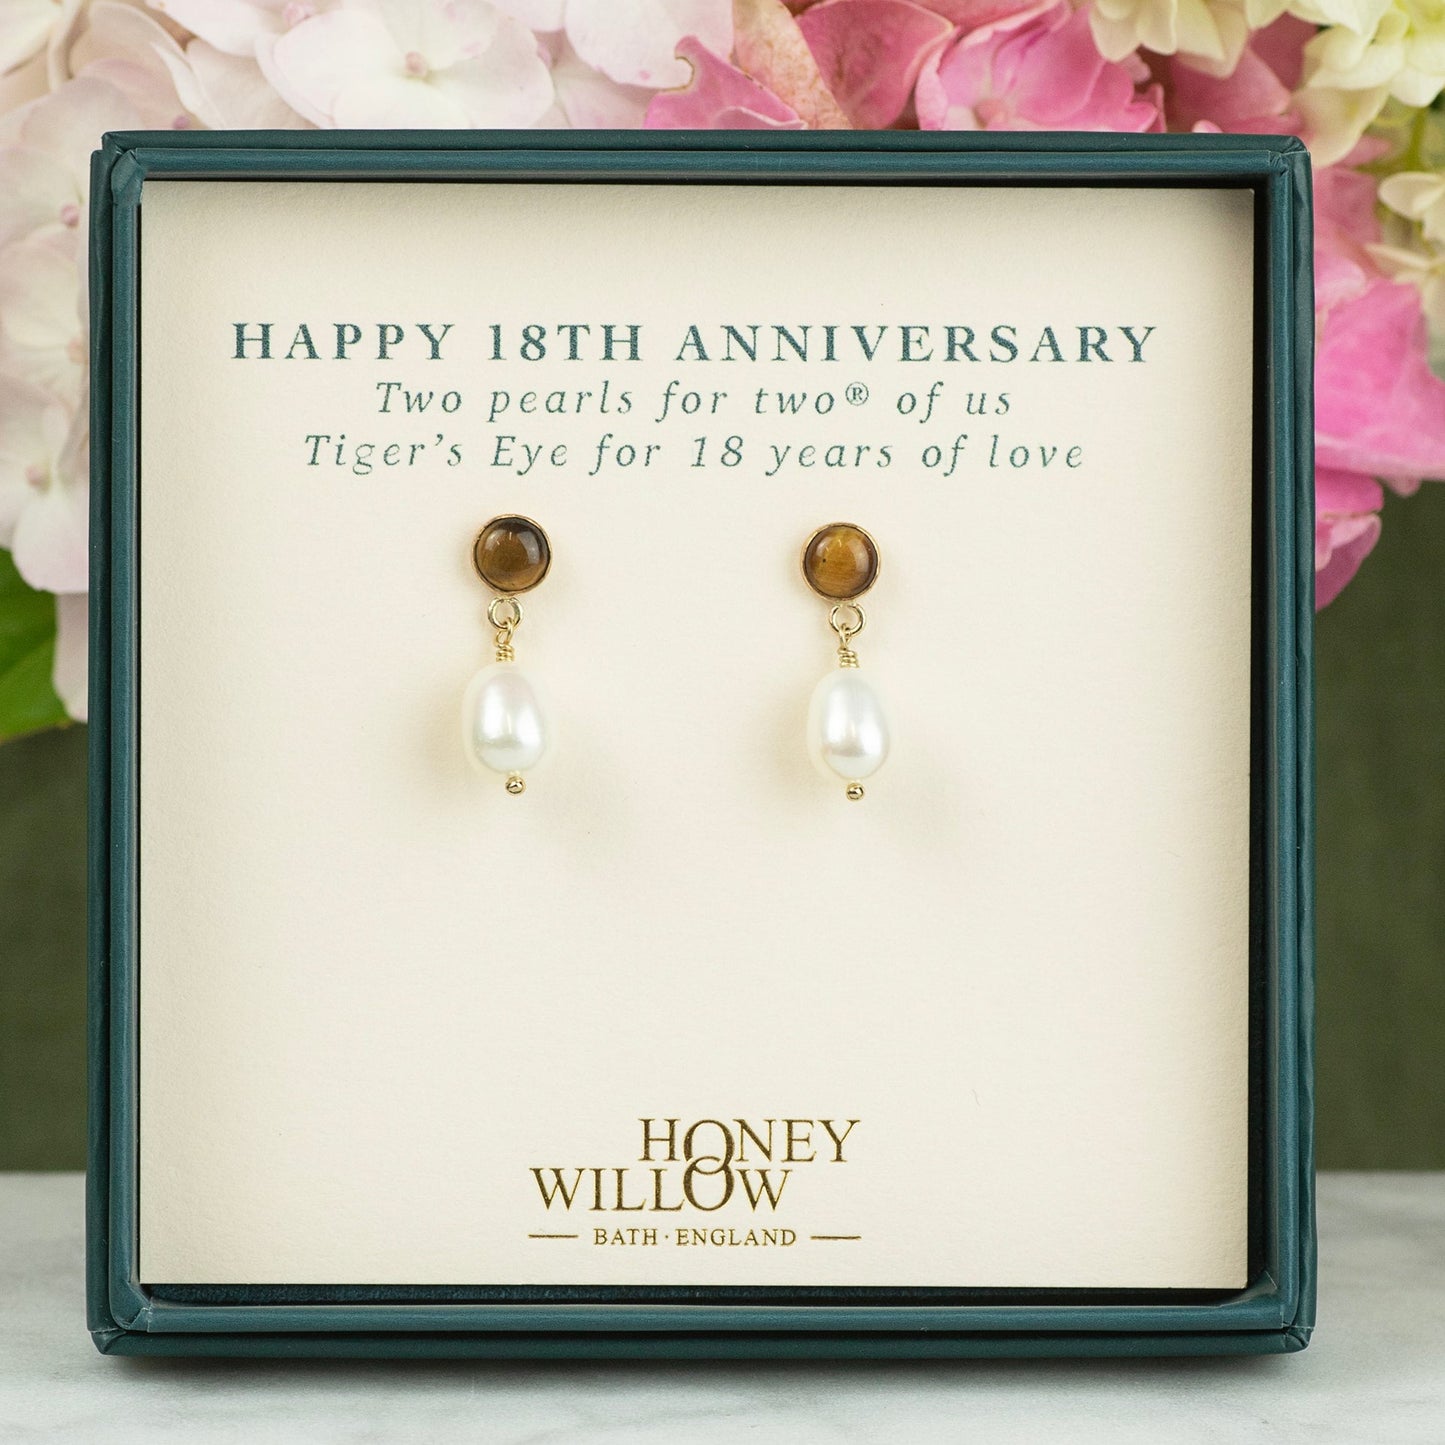 18th Anniversary Gift - Tiger's Eye Anniversary Earrings - Silver & Gold